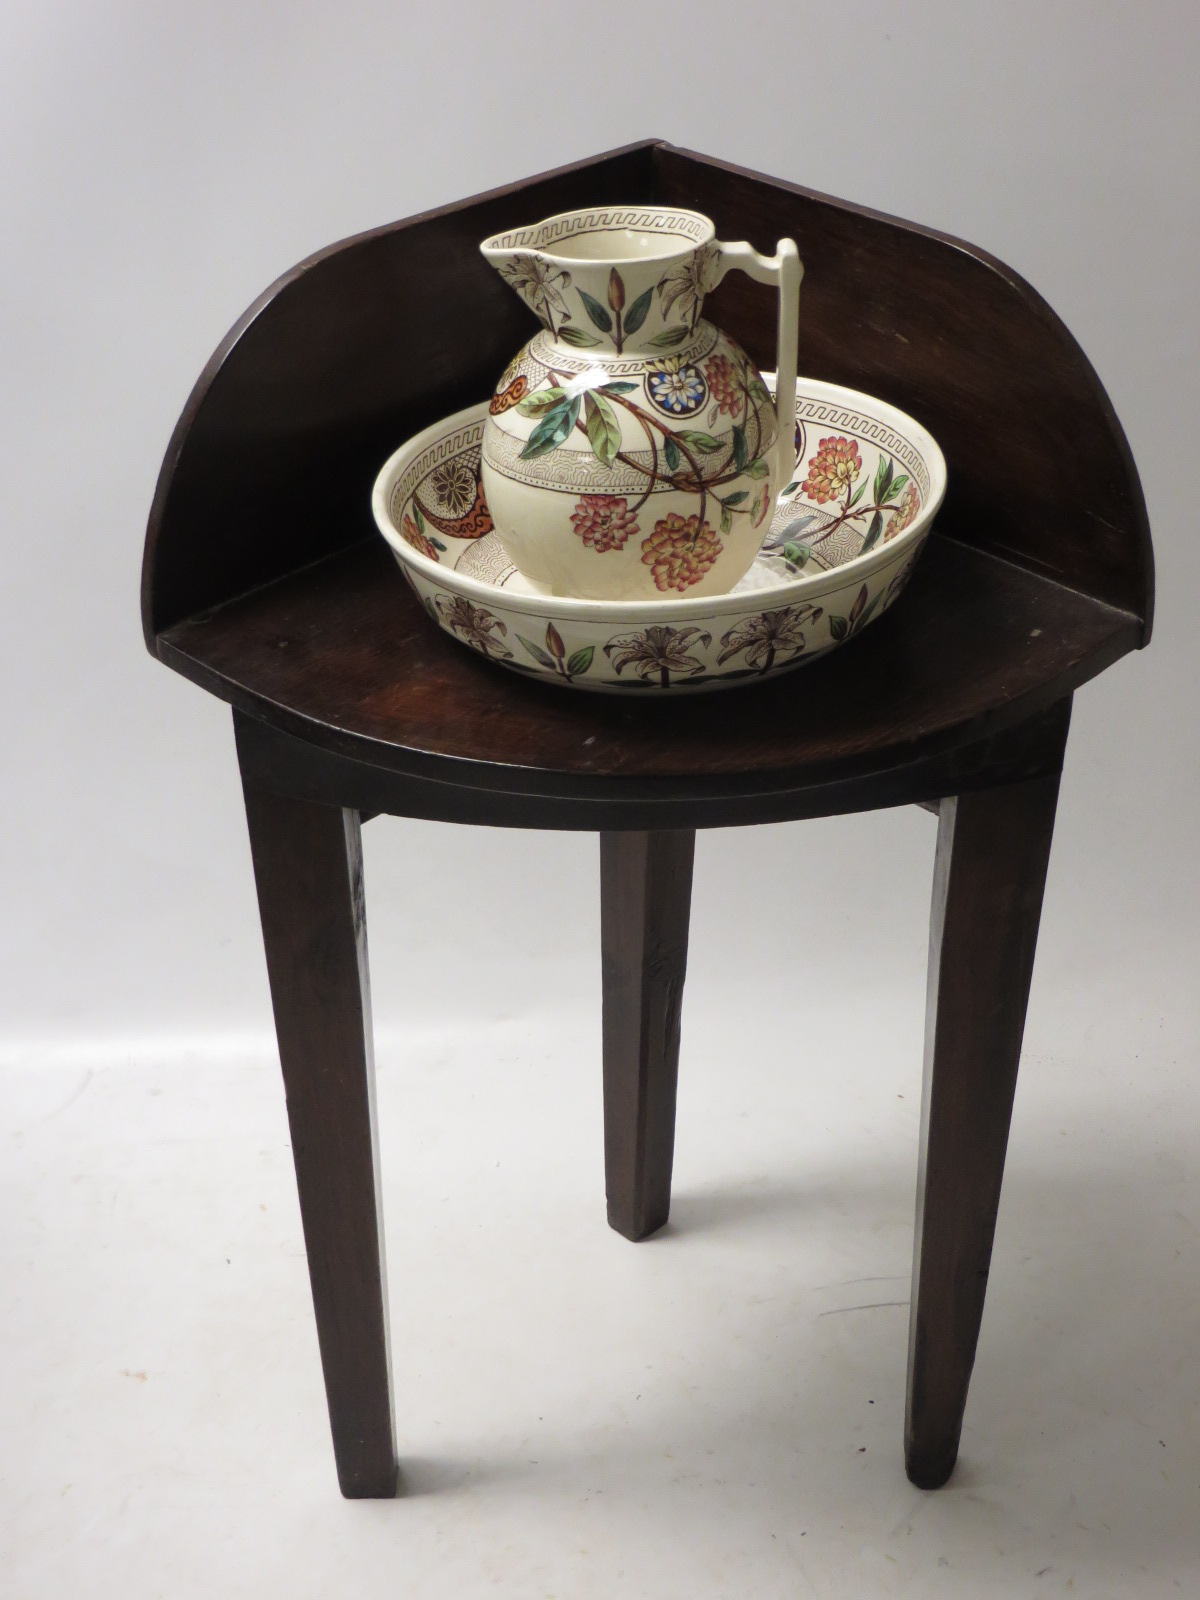 A child’s unusual corner washstand with its small jug and basin. The earthenware polychrome